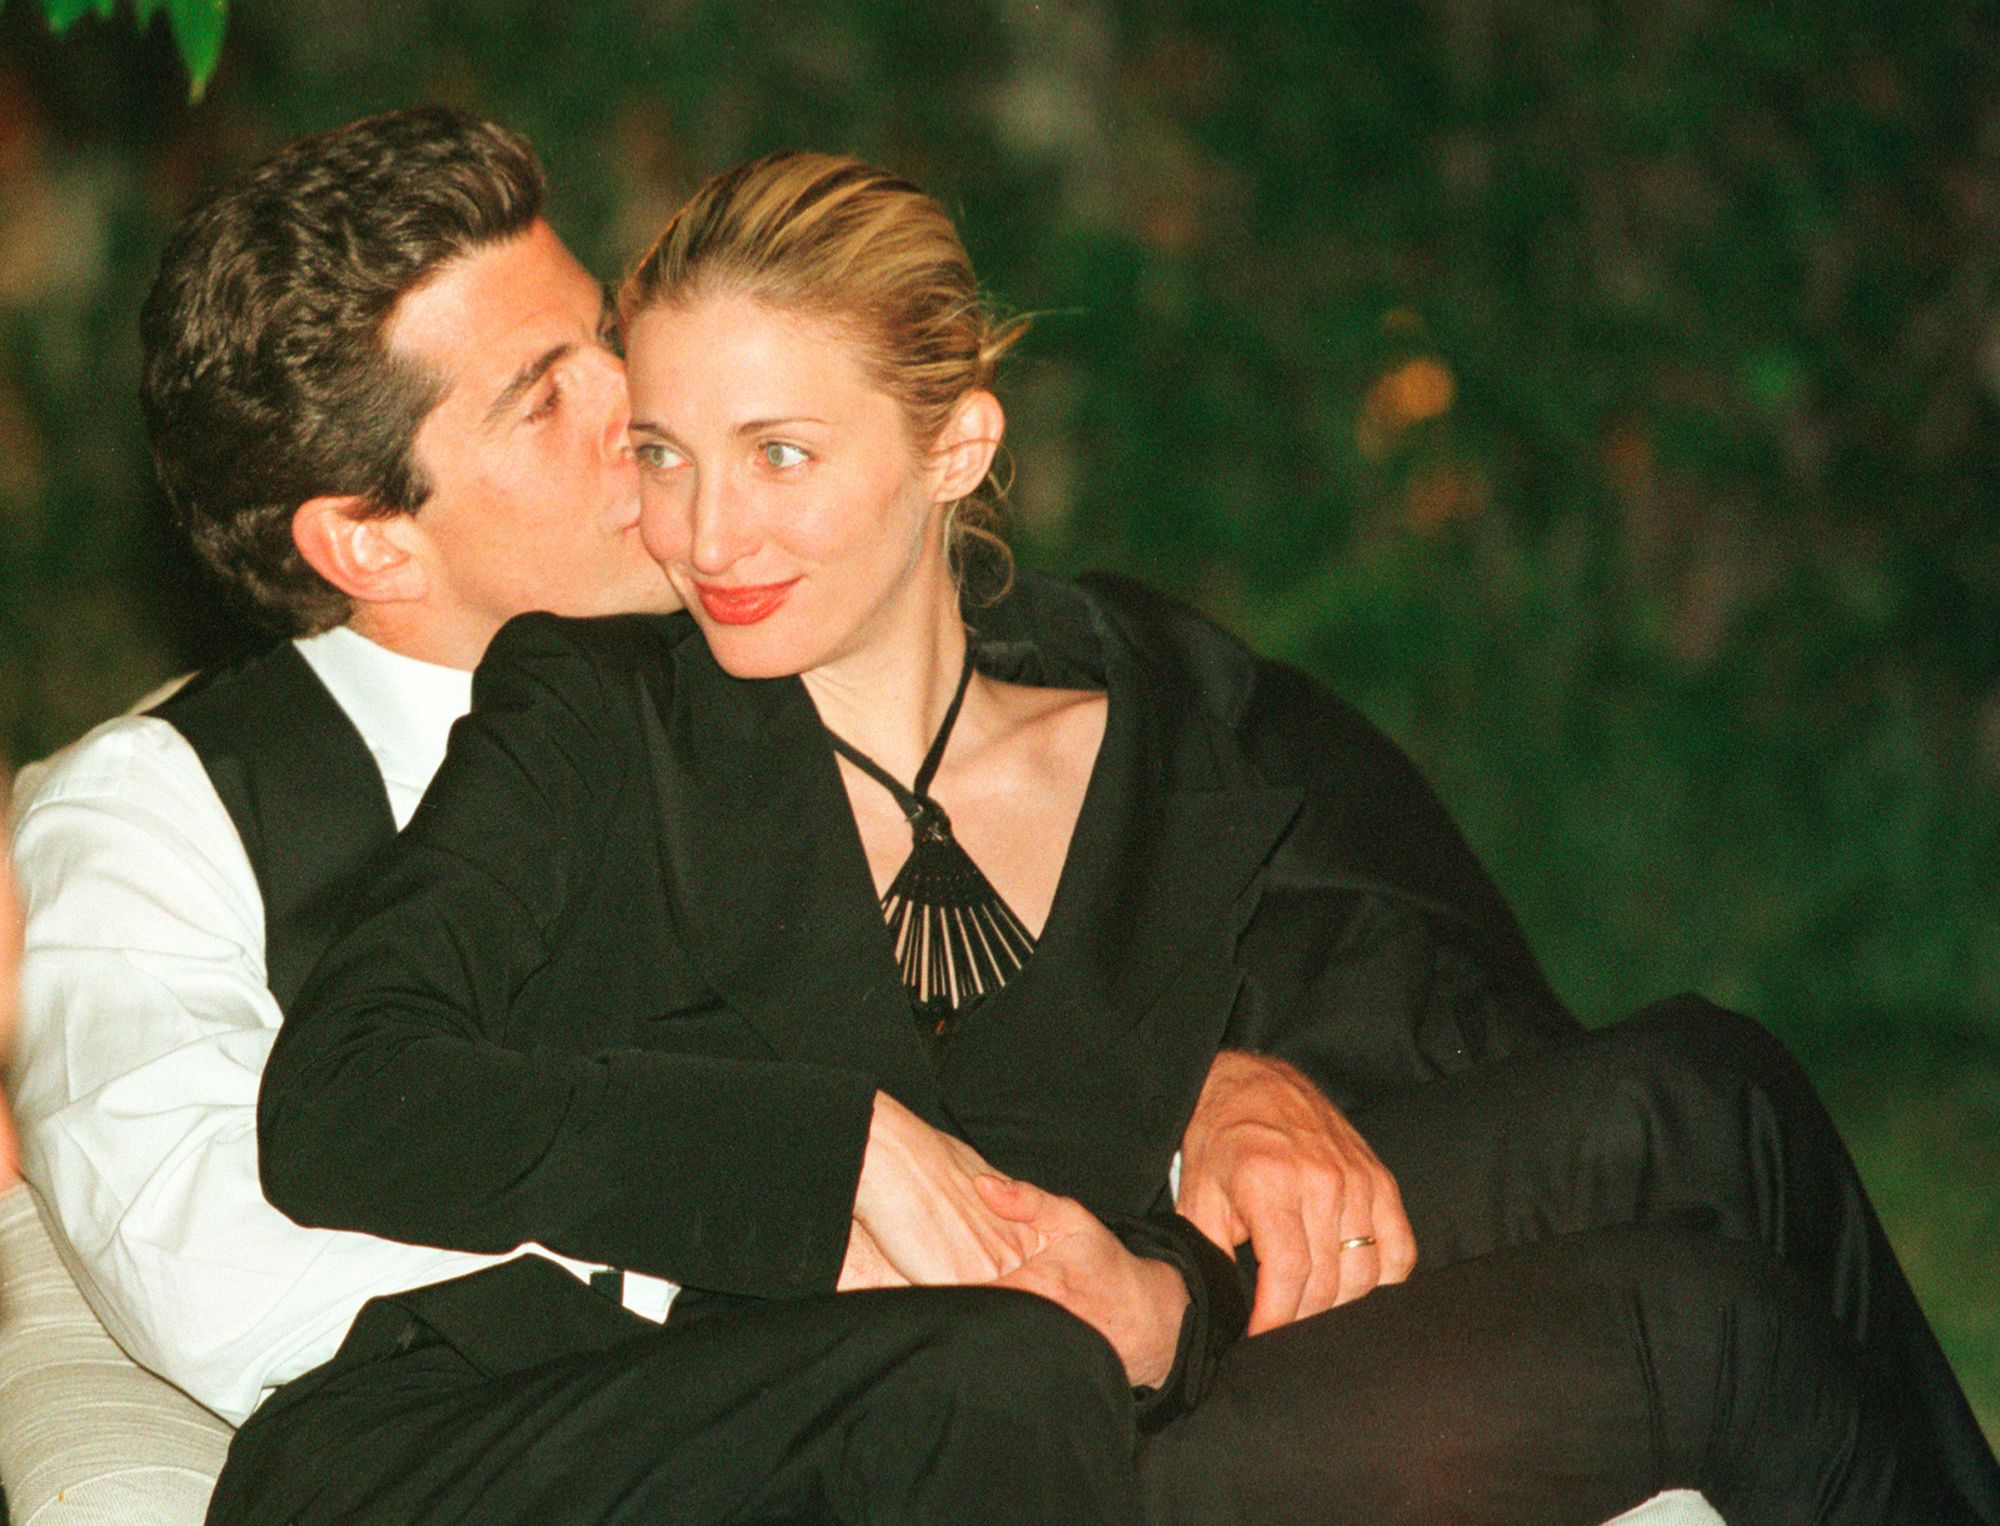 90s Fashion and Calvin Klein: Carolyn Besette-Kennedy's street style in  iconic outfits